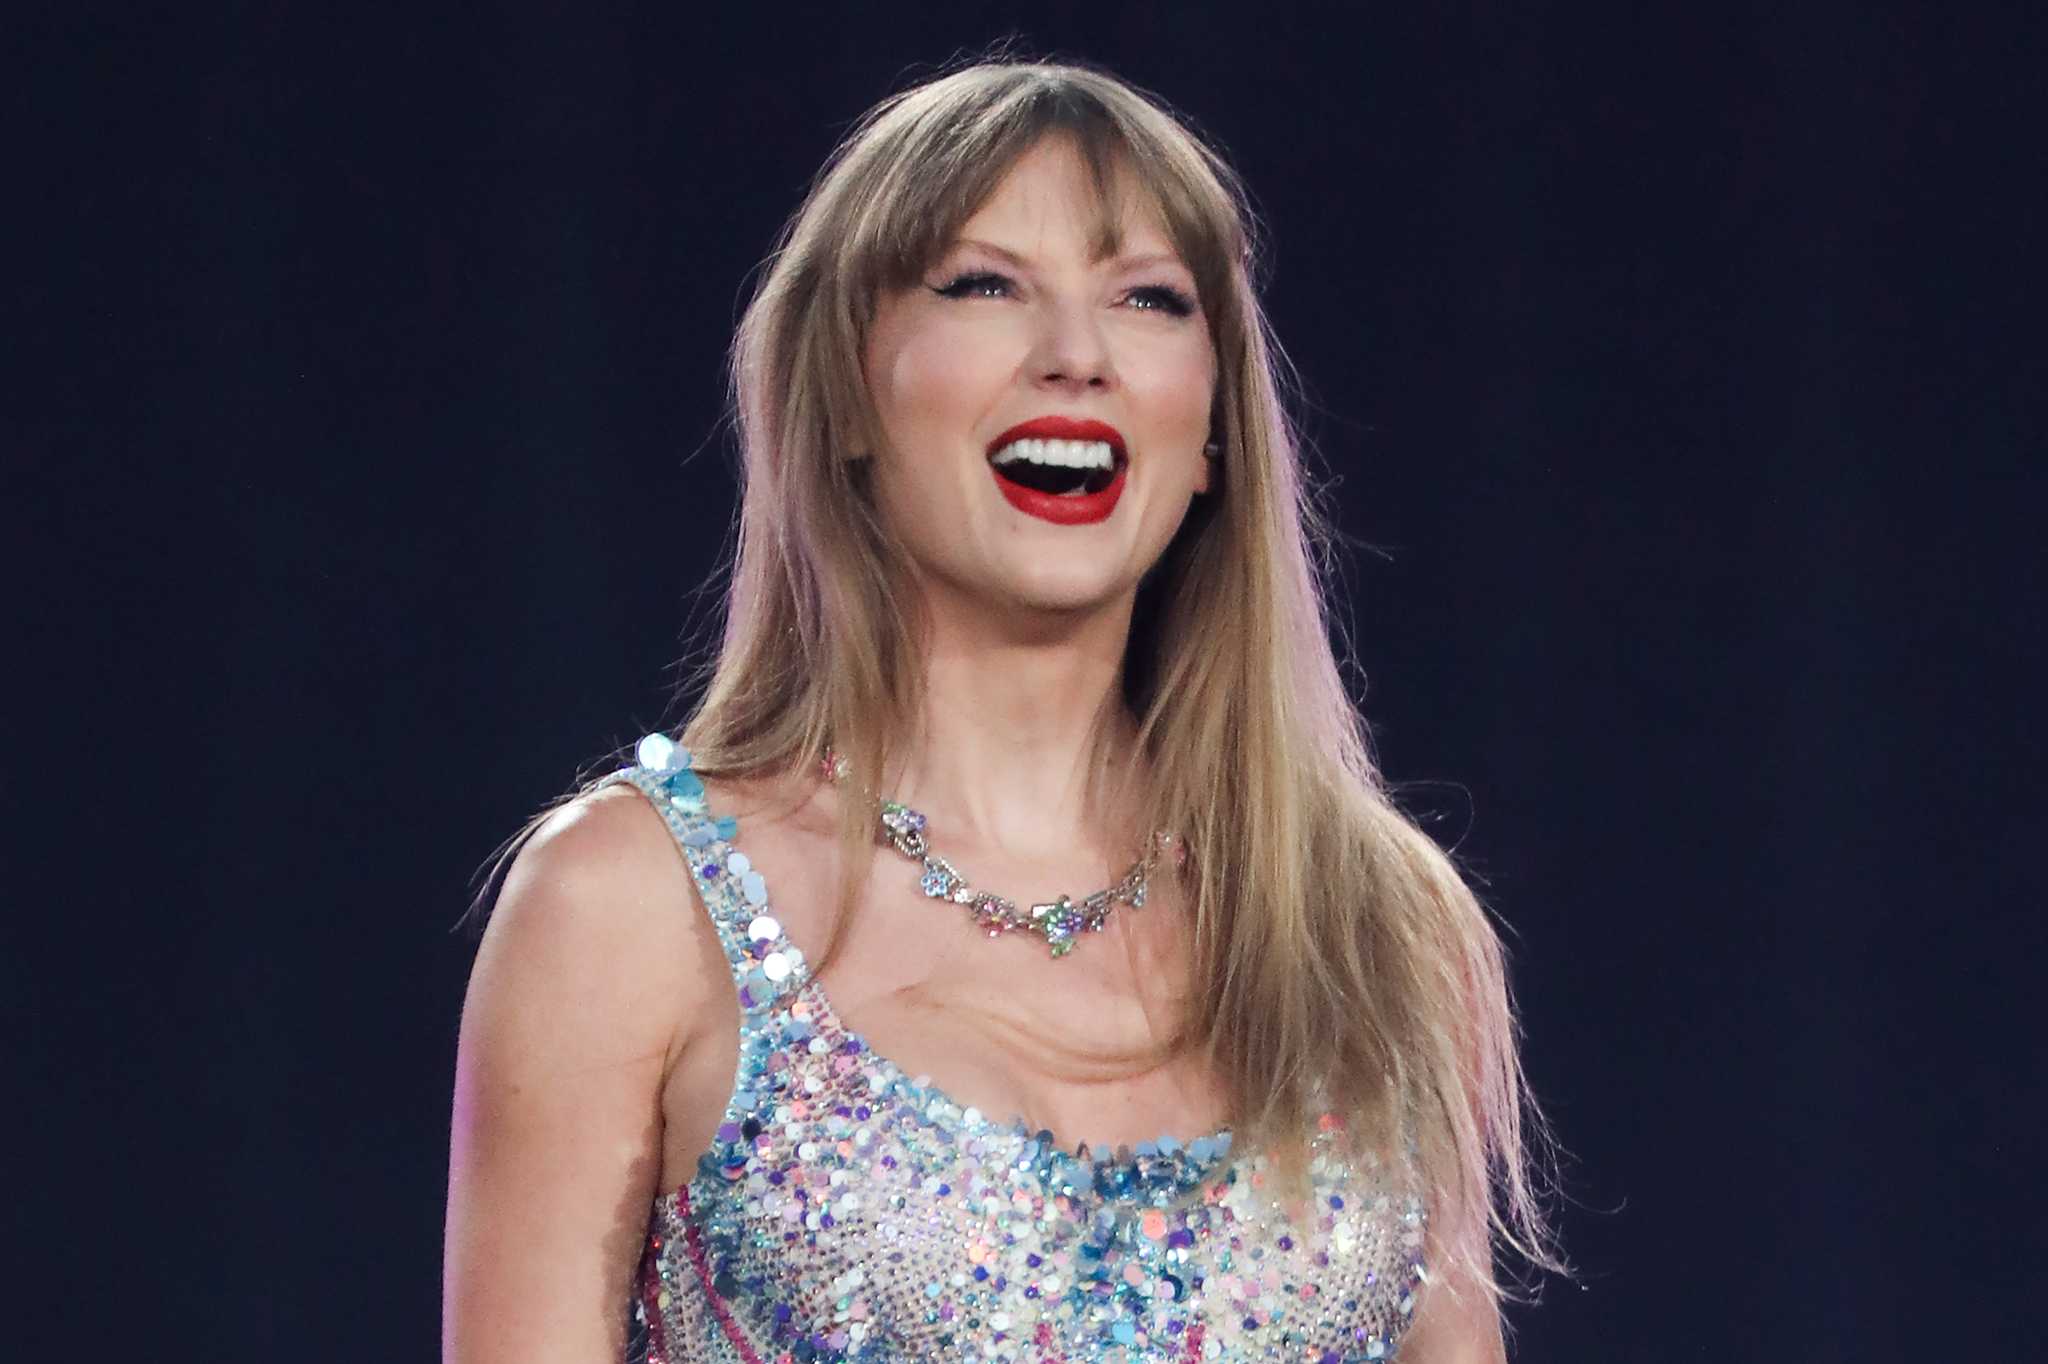 Taylor Swift's Epic Concert at Levi's Stadium Breaks Curfew and Sets